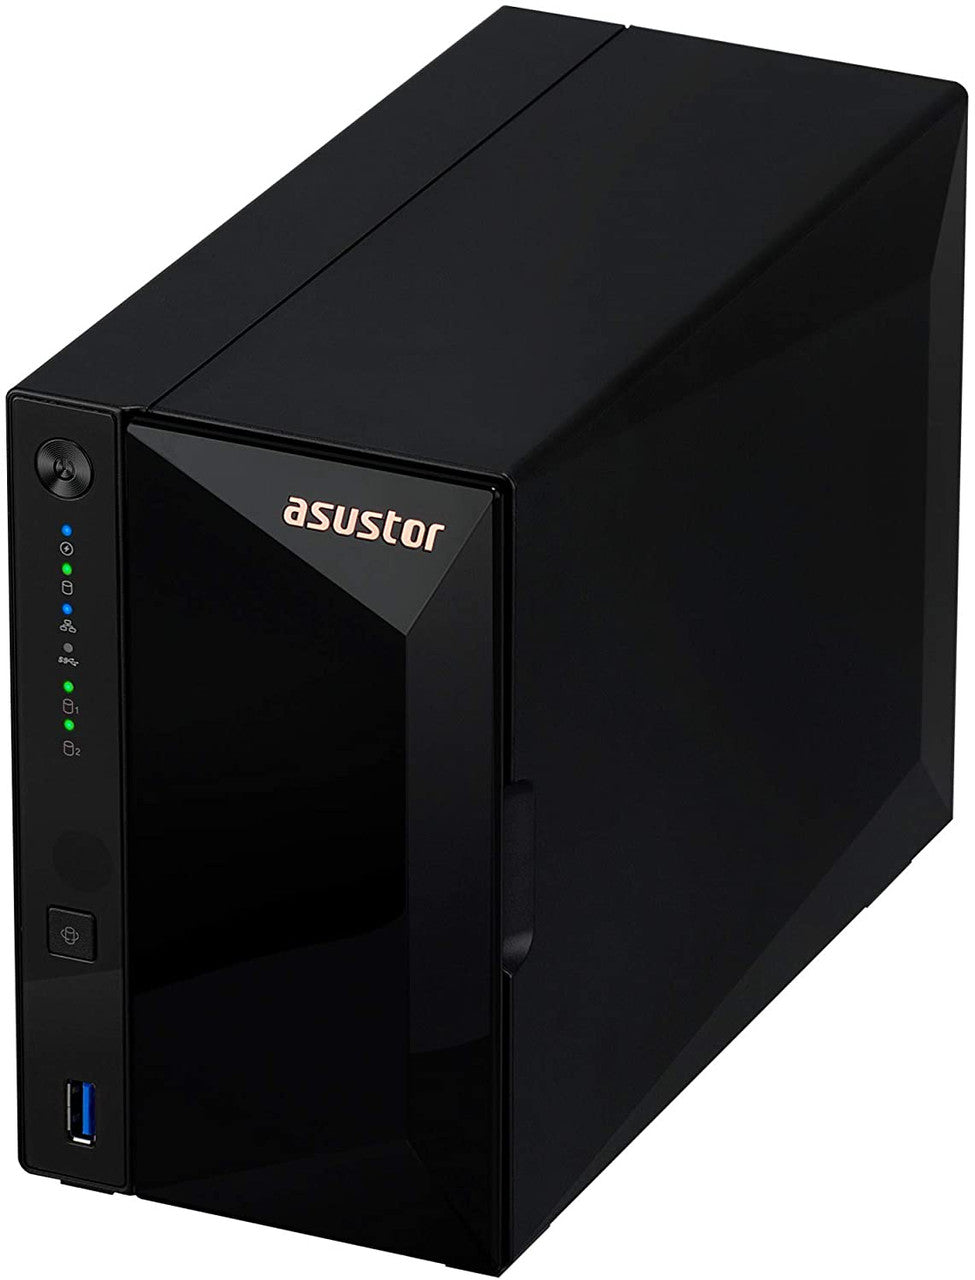 Asustor AS3302T 2-Bay Drivestor 2 PRO NAS with 2GB RAM and 12TB (2x6TB) Western Digital RED PRO Drives Fully Assembled and Tested